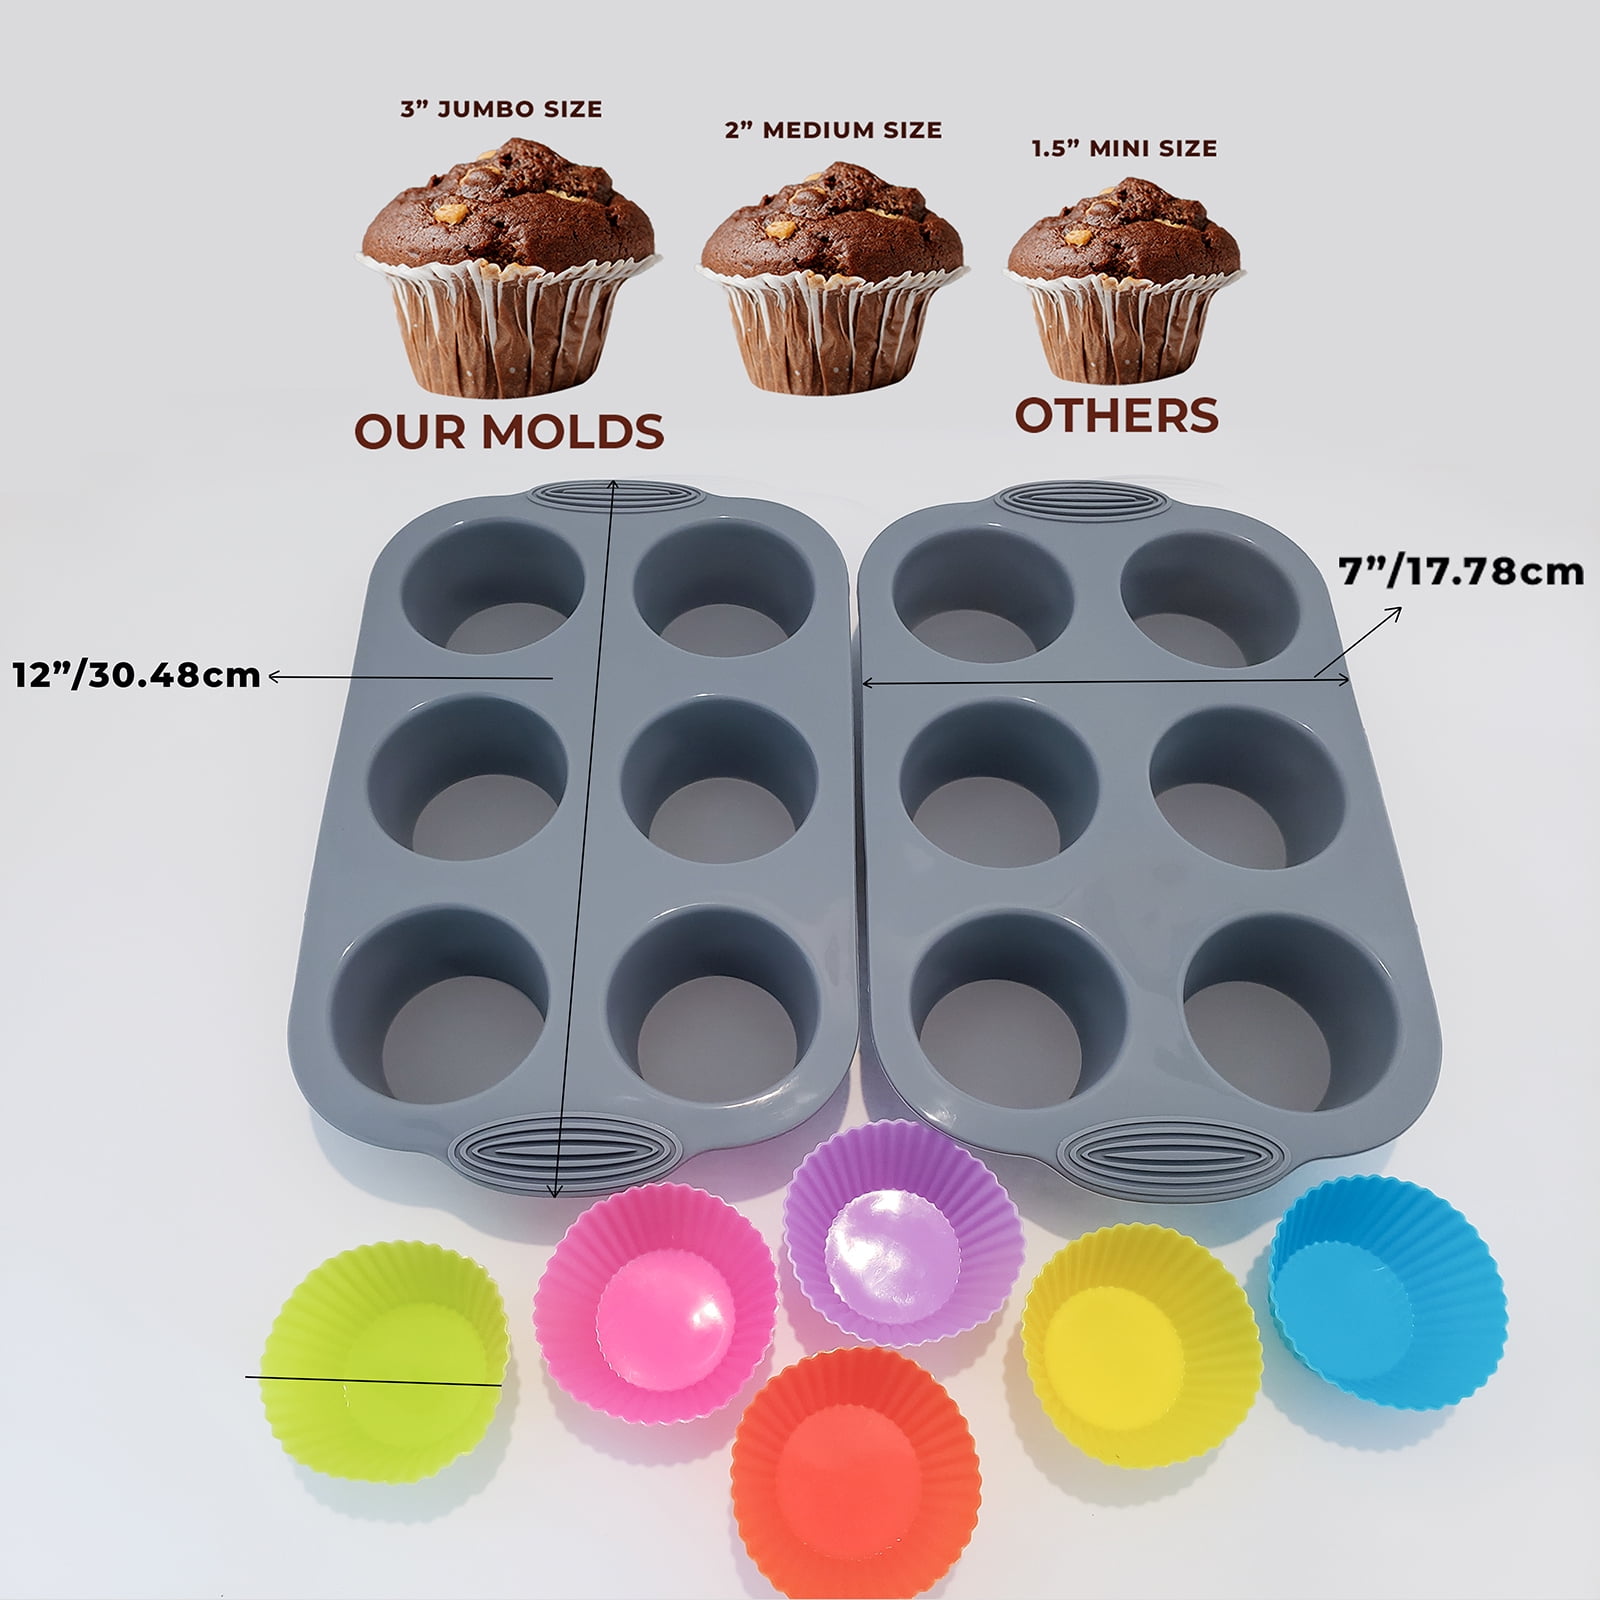 Large Square Happy Birthday Cake Baking Pan Muffin Bakeware Bread Mold Silicone 